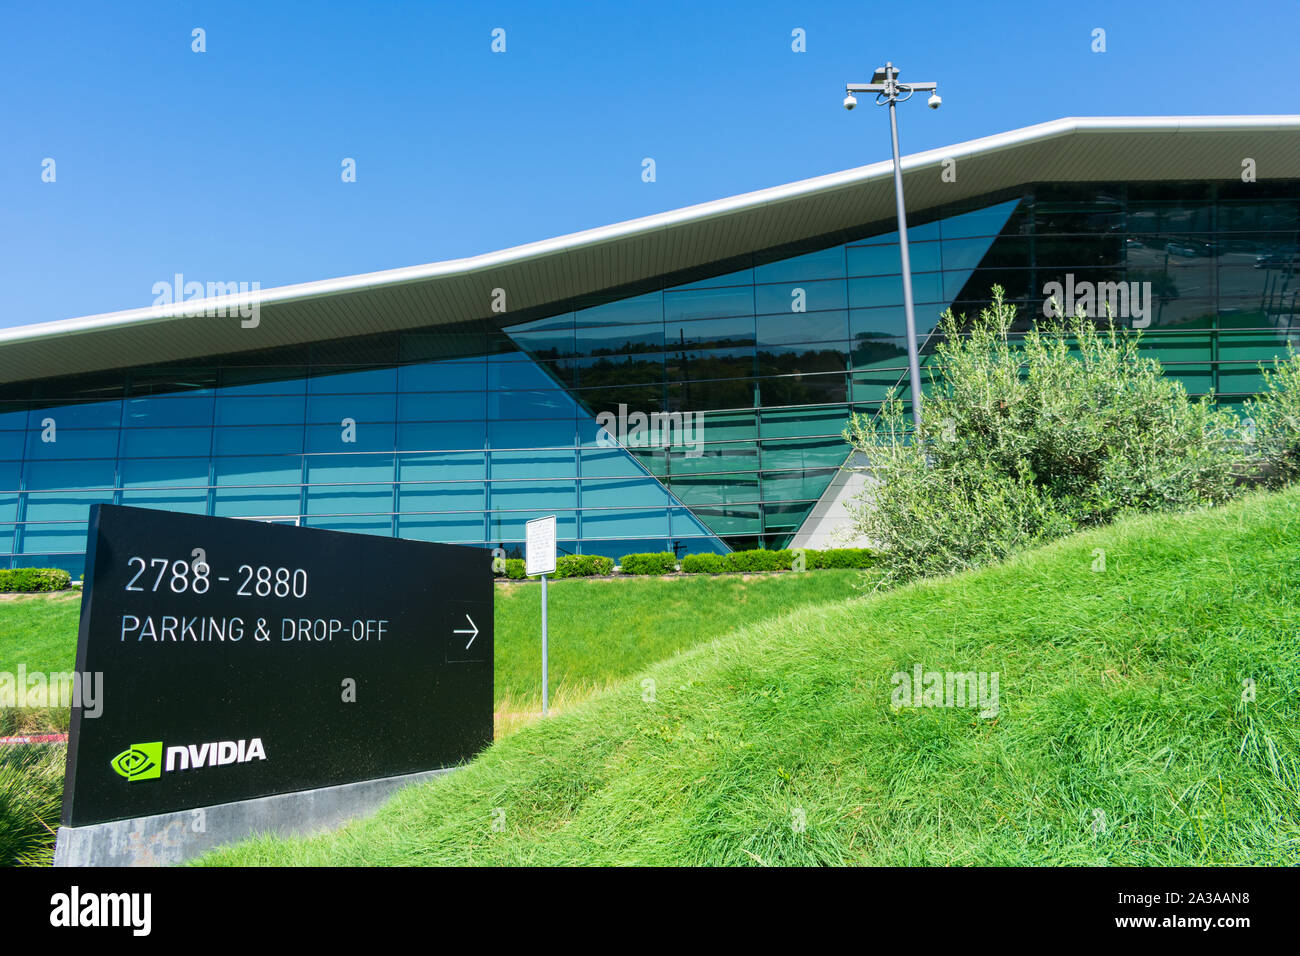 Nvidia logo and sign at company Endeavor headquarters in Silicon Valley, high-tech hub of San Francisco Bay Area Stock Photo